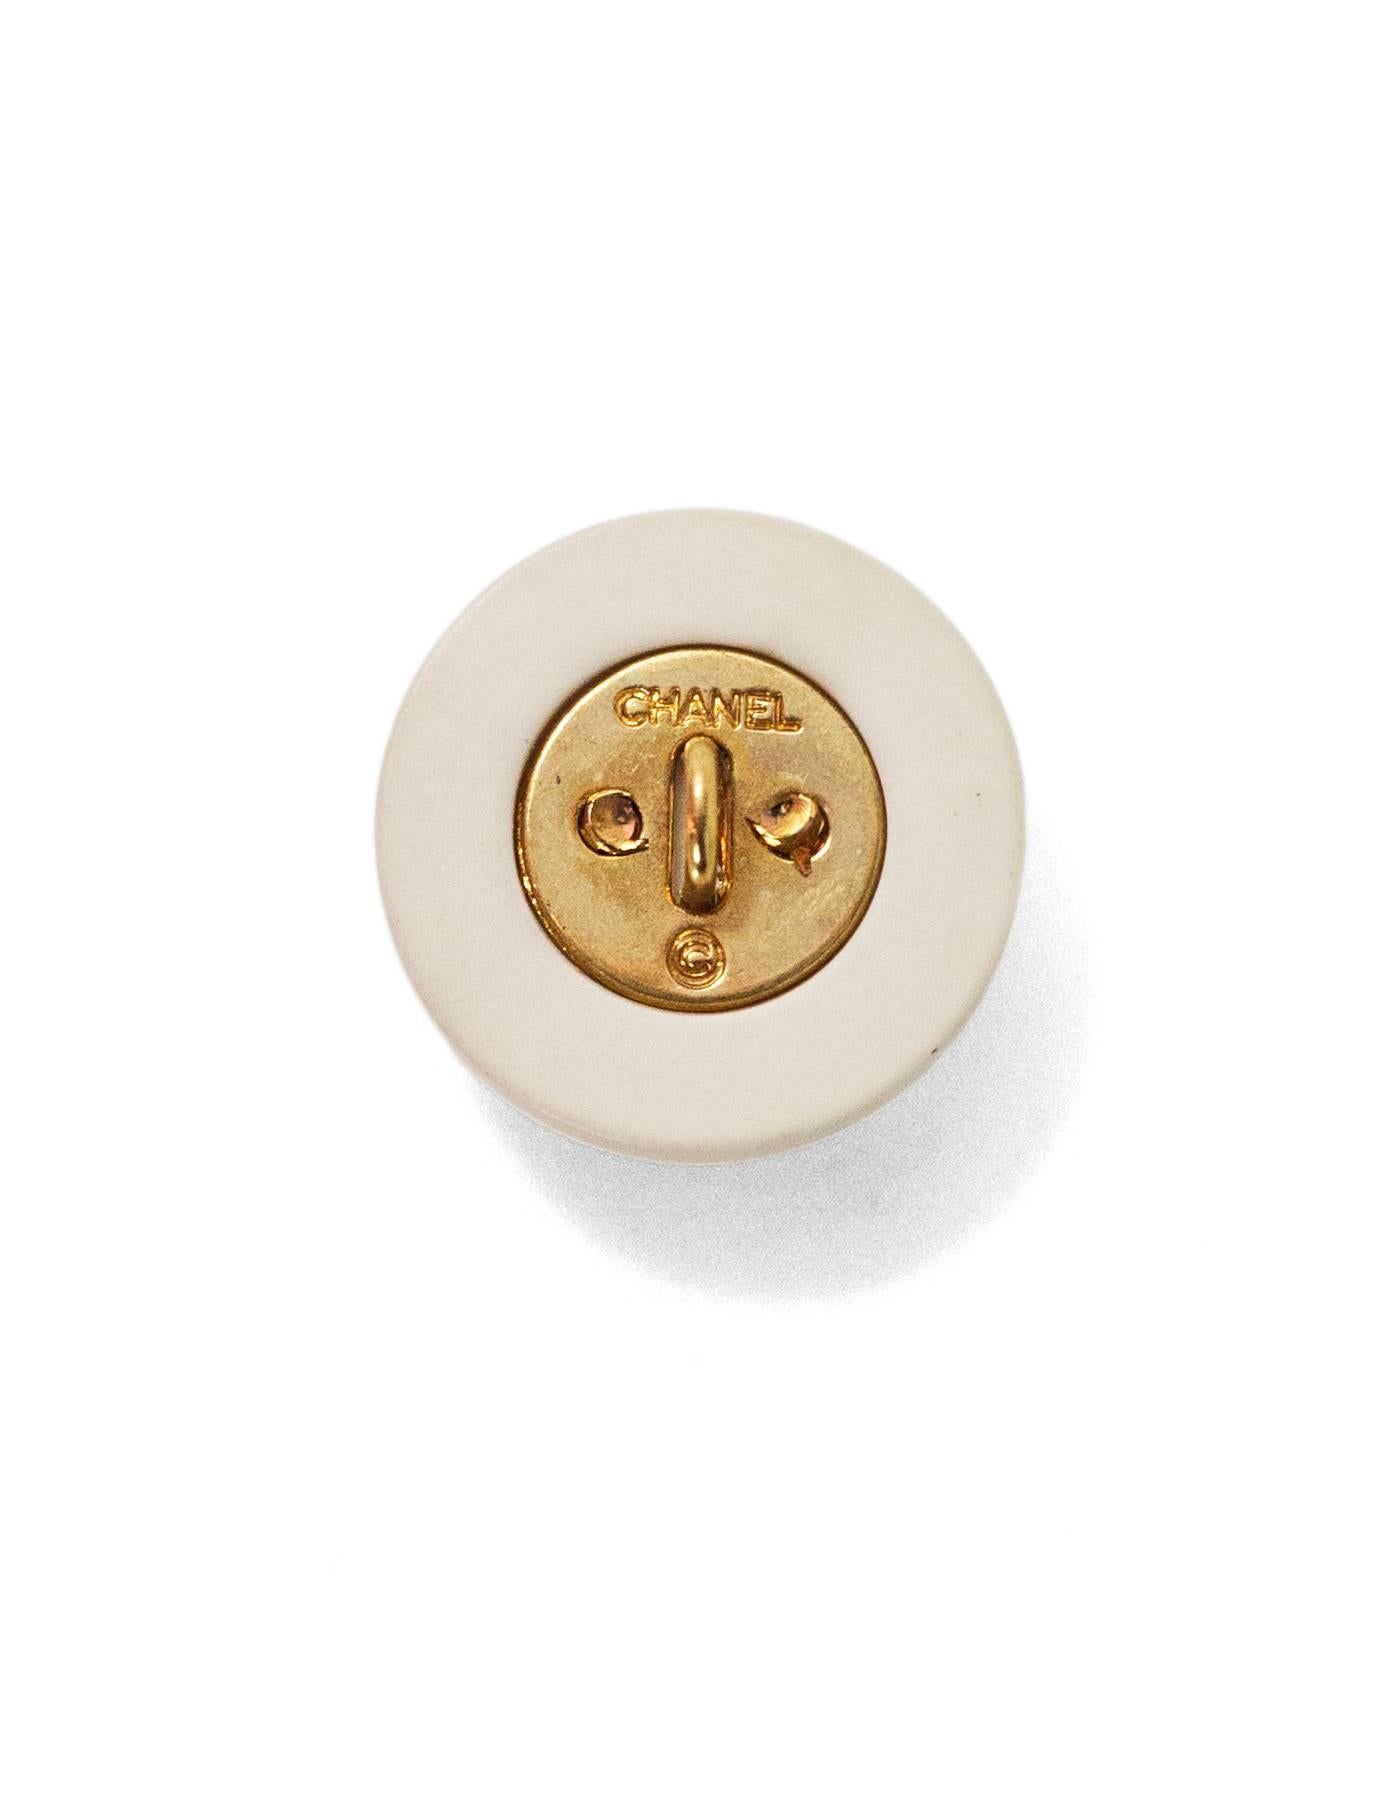 Beige Chanel Set of Two 20mm Cream & Goldtone Textured CC Buttons